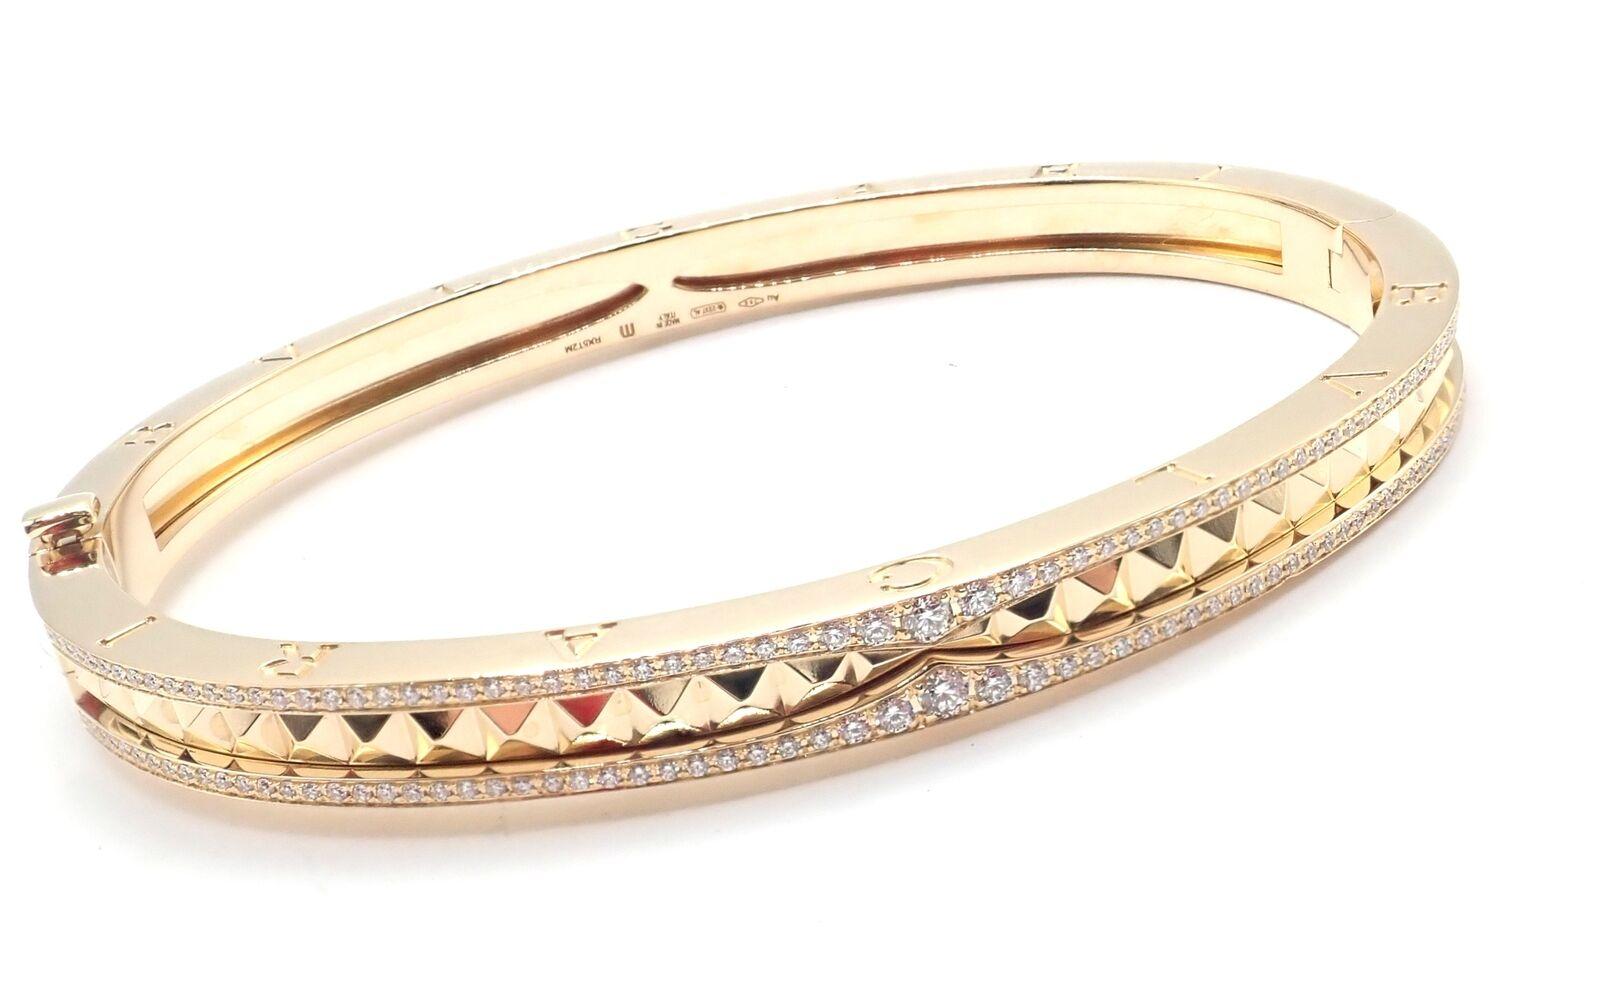 18k Yellow Gold B.Zero1 Rock Diamond Bangle Bracelet by Bulgari. B.zero1 Rock bracelet in 18k yellow gold with studded spiral and pavé diamonds on the edges
With 320 brilliant cut diamonds VS1 clarity, G color total weight approximately